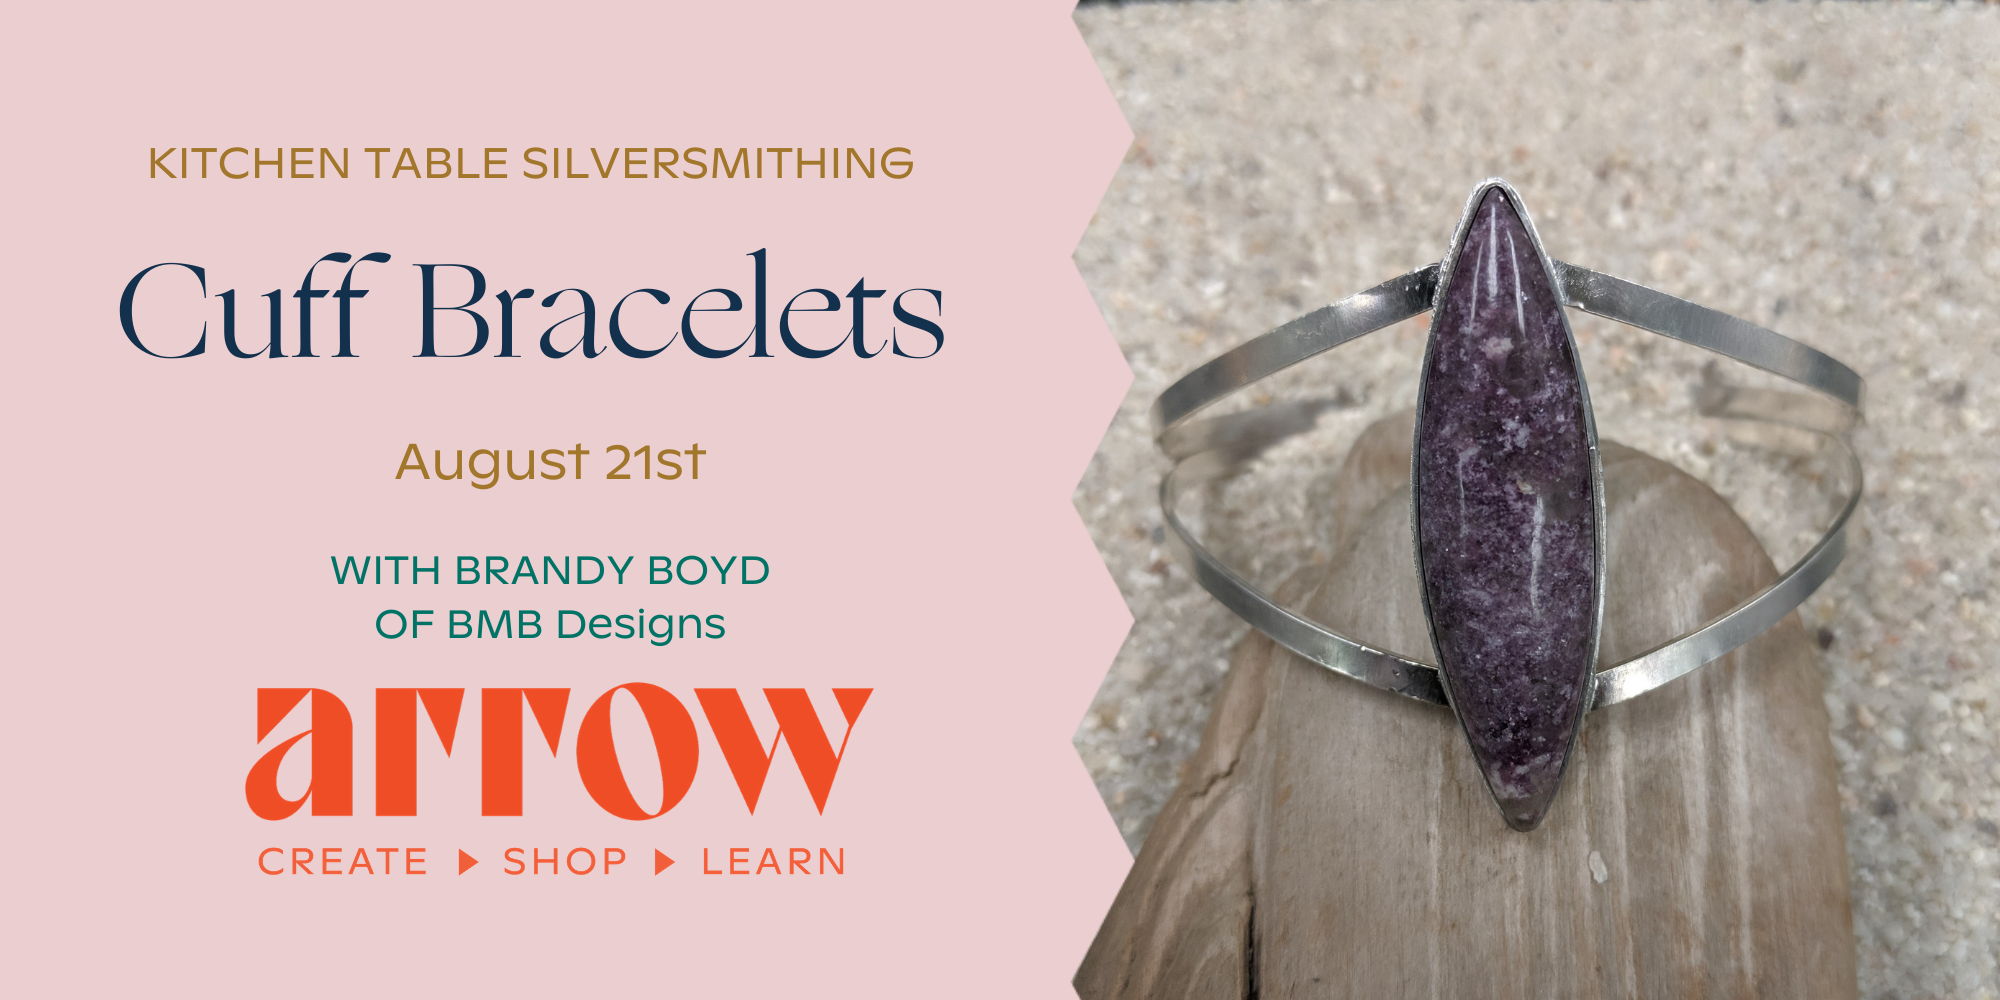 Kitchen Table Silversmithing Class - Bold Statement Cuffs with Brandy Boyd promotional image